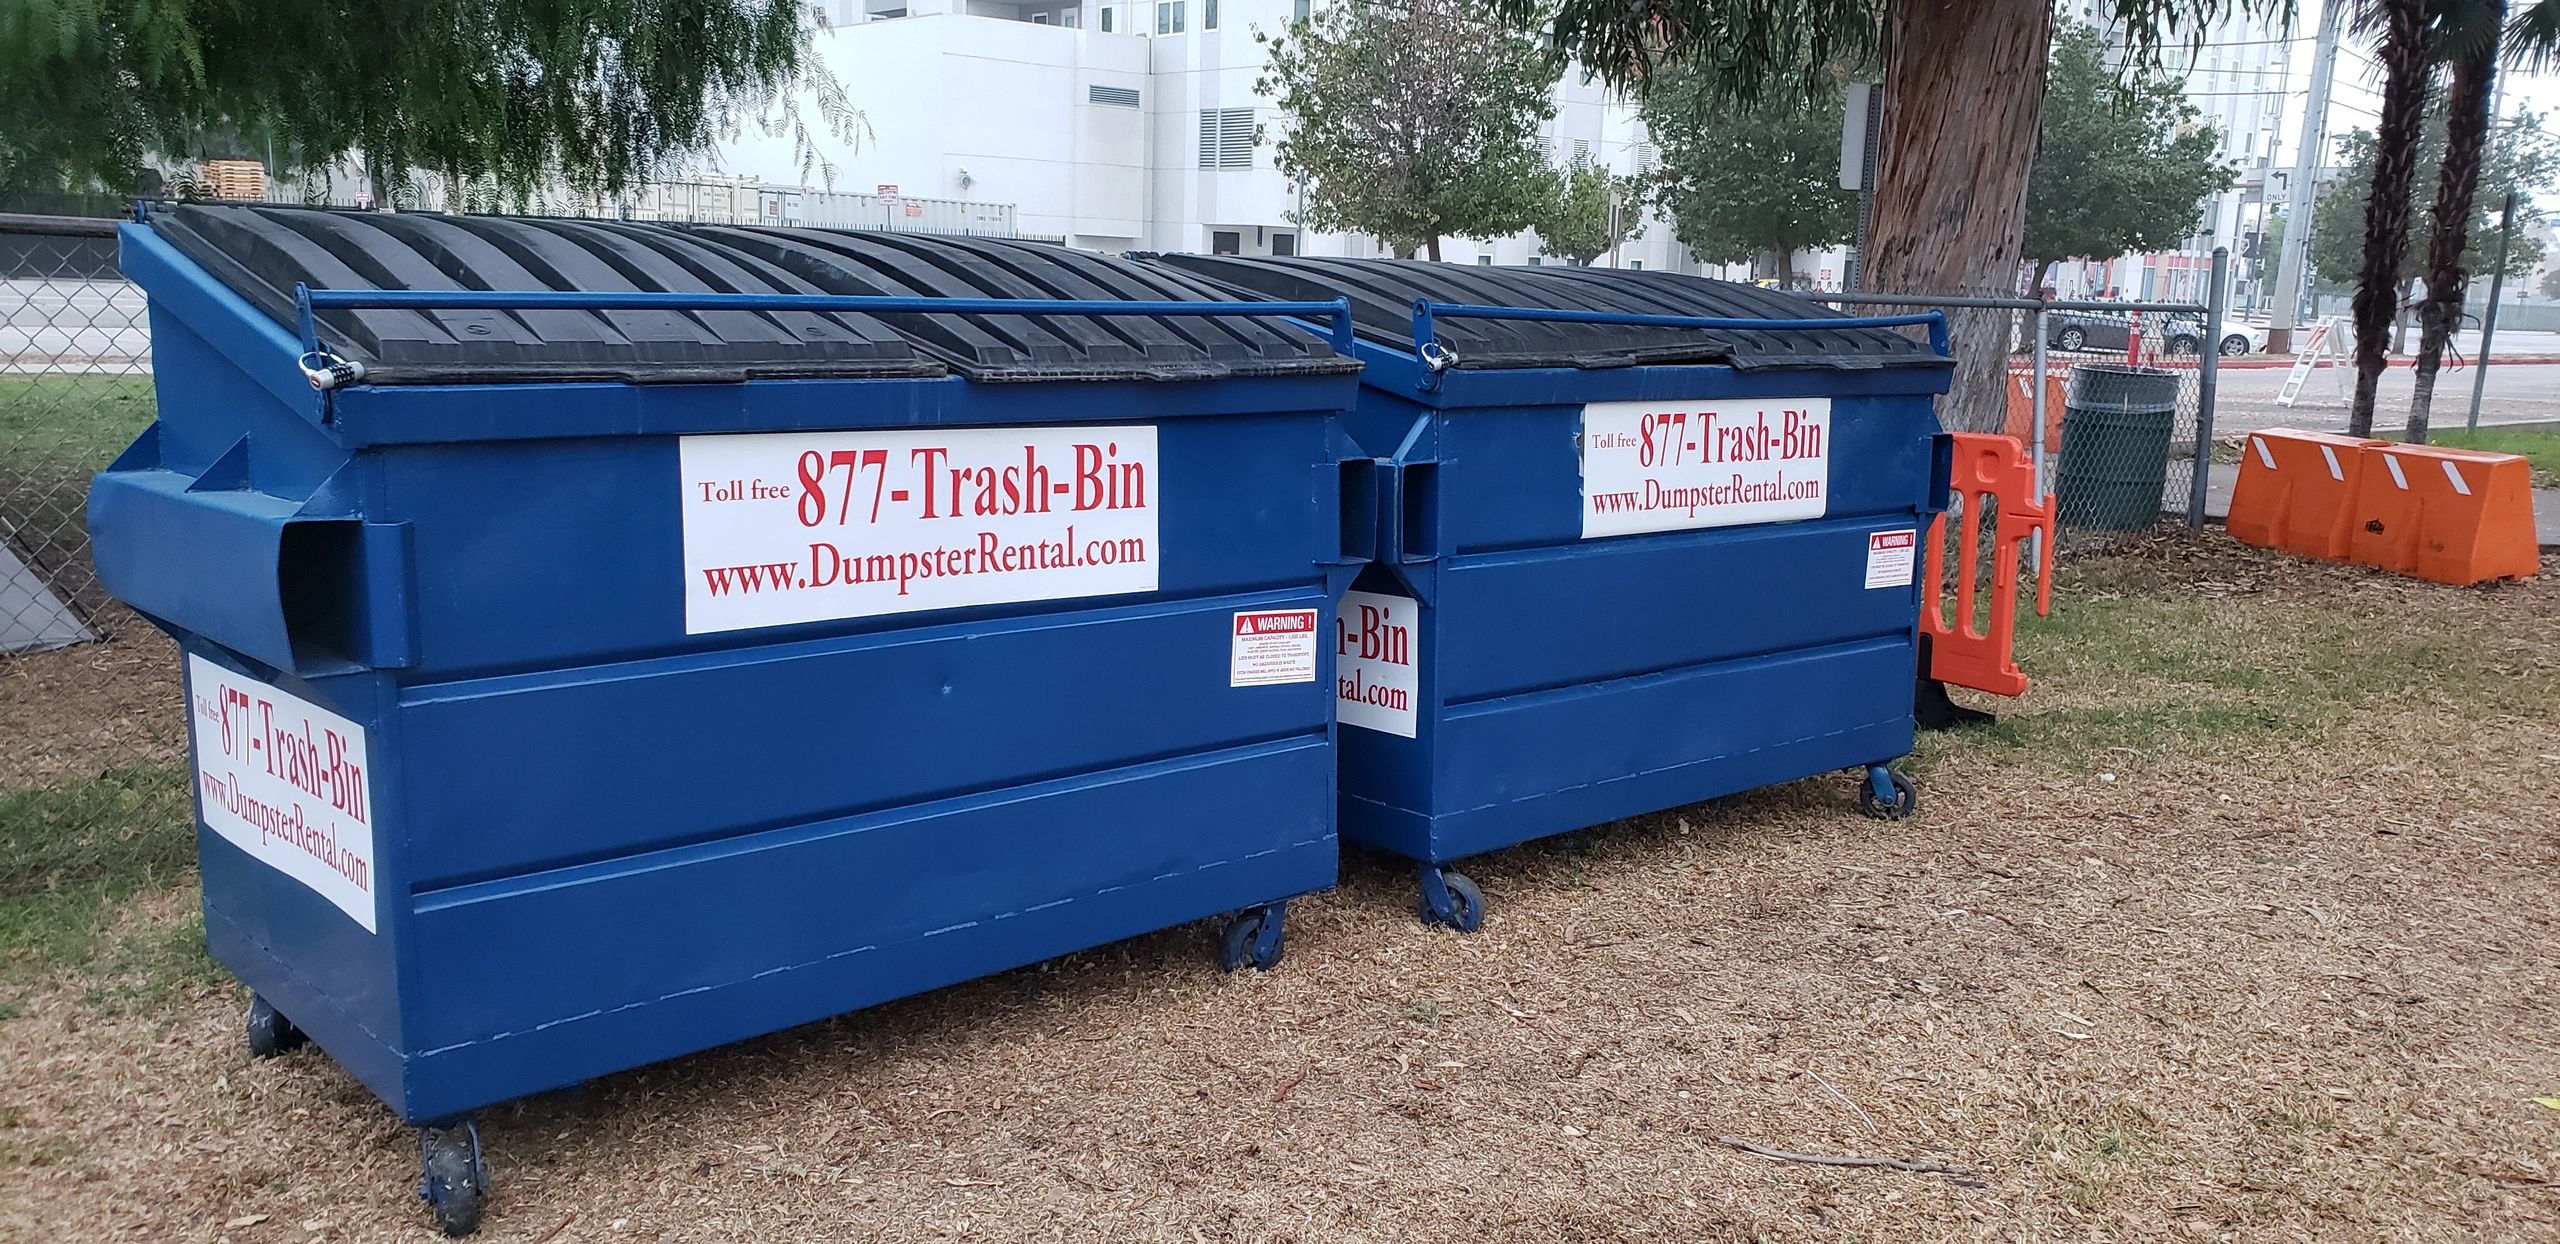 2 dumpsters with trash-bin label on them